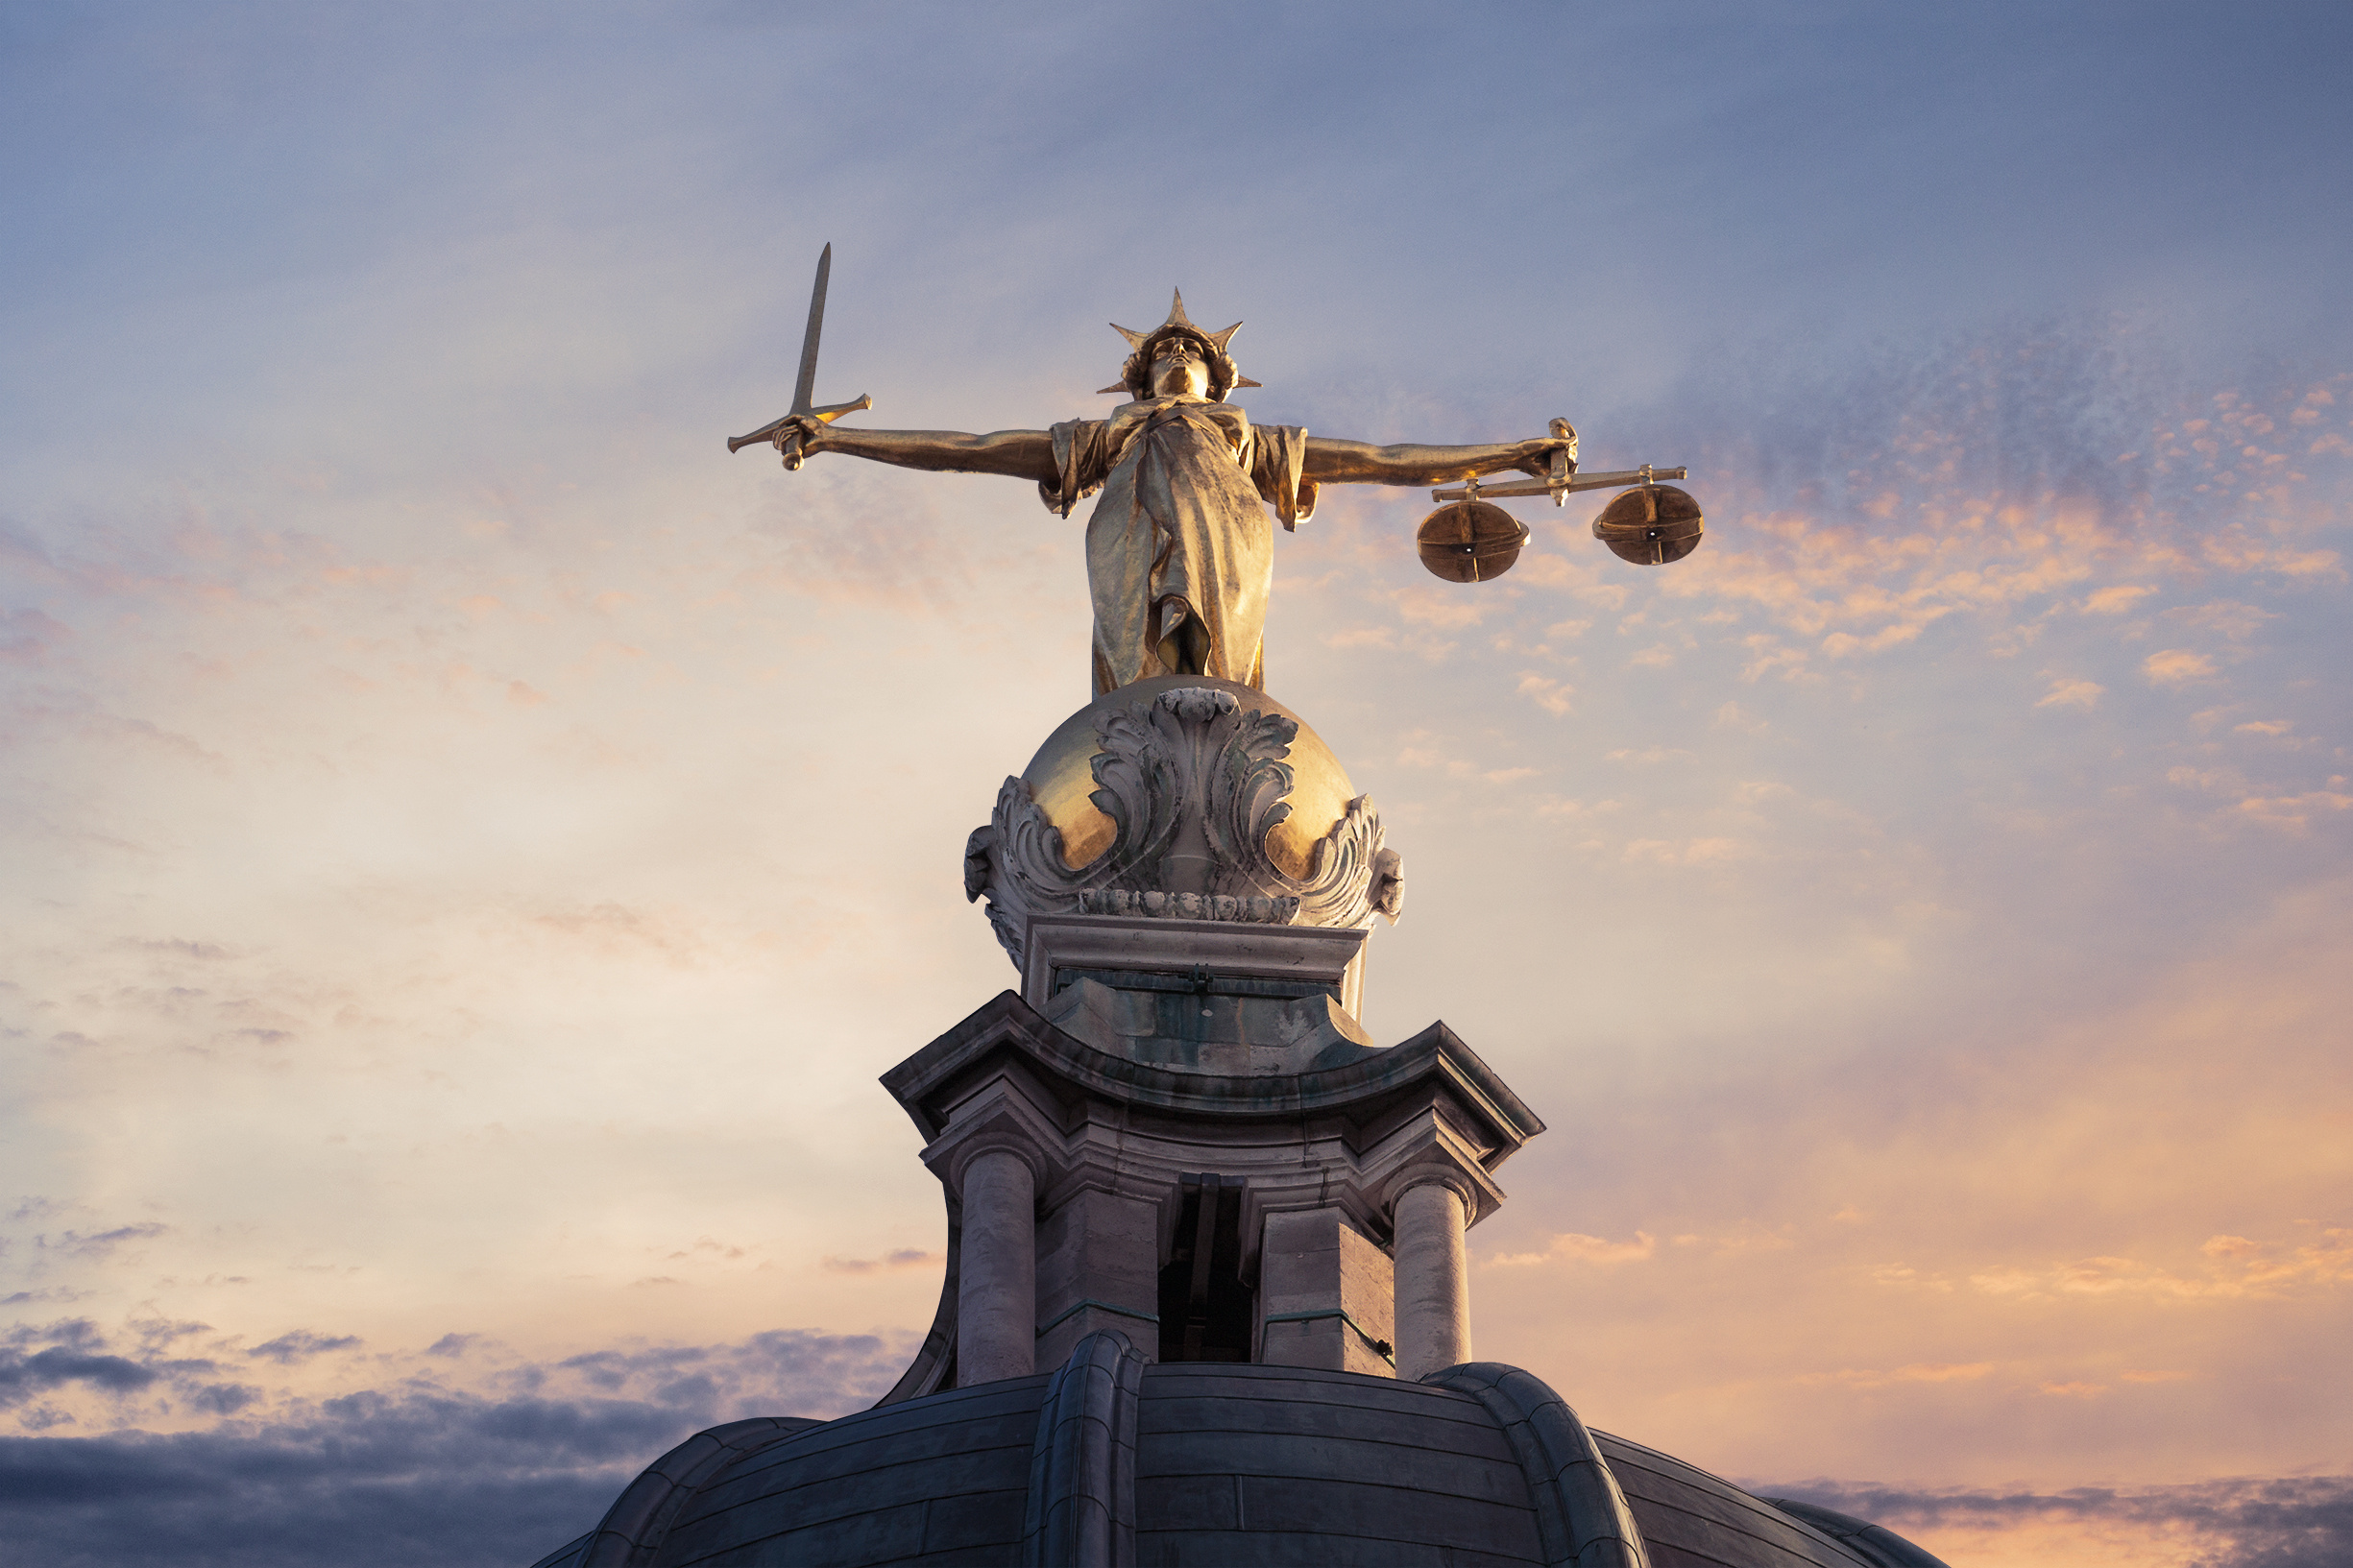 Gold Lady Justice Statue on the top of the Old Bailey in London, England, with a sunset sky in the background